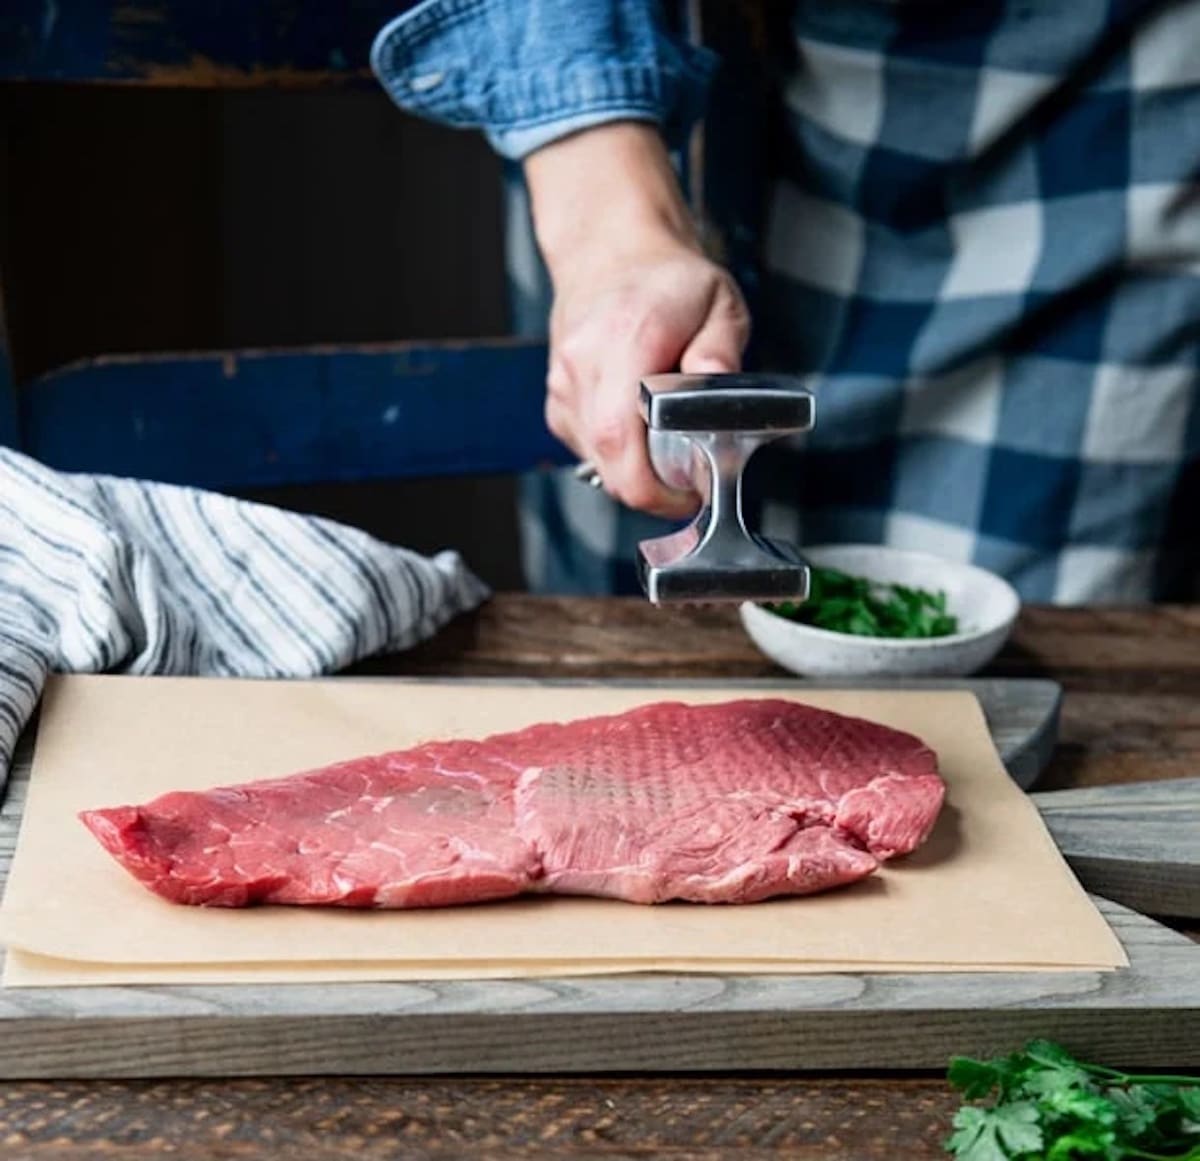 Tenderizer Marinade Tool For Flavorful Meat - Inspire Uplift